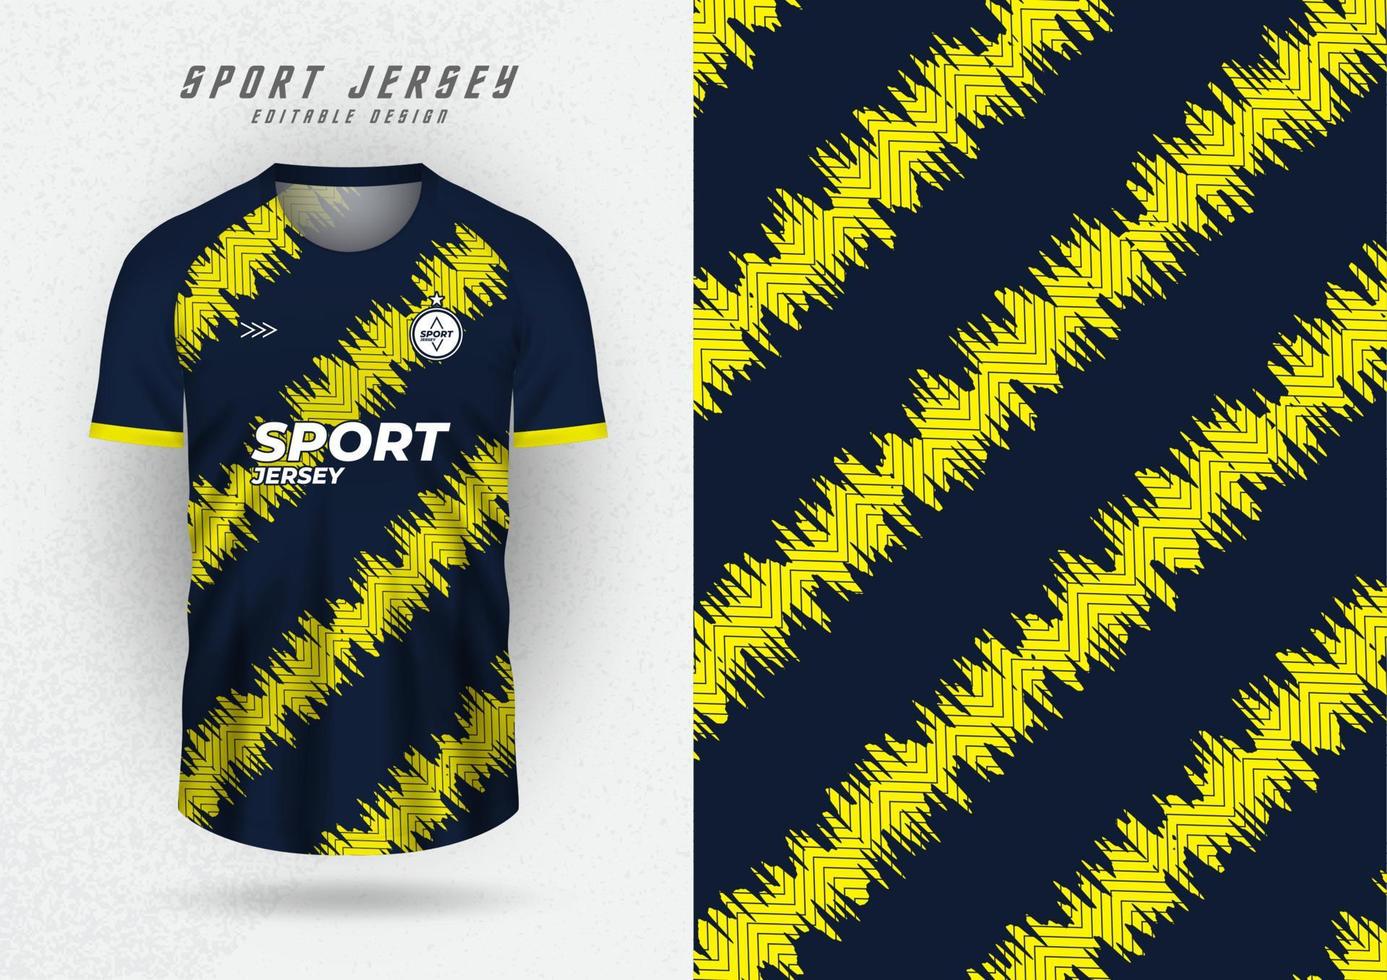 Background mockup for sports shirt, gym shirt, running shirt, black with yellow stripes. vector